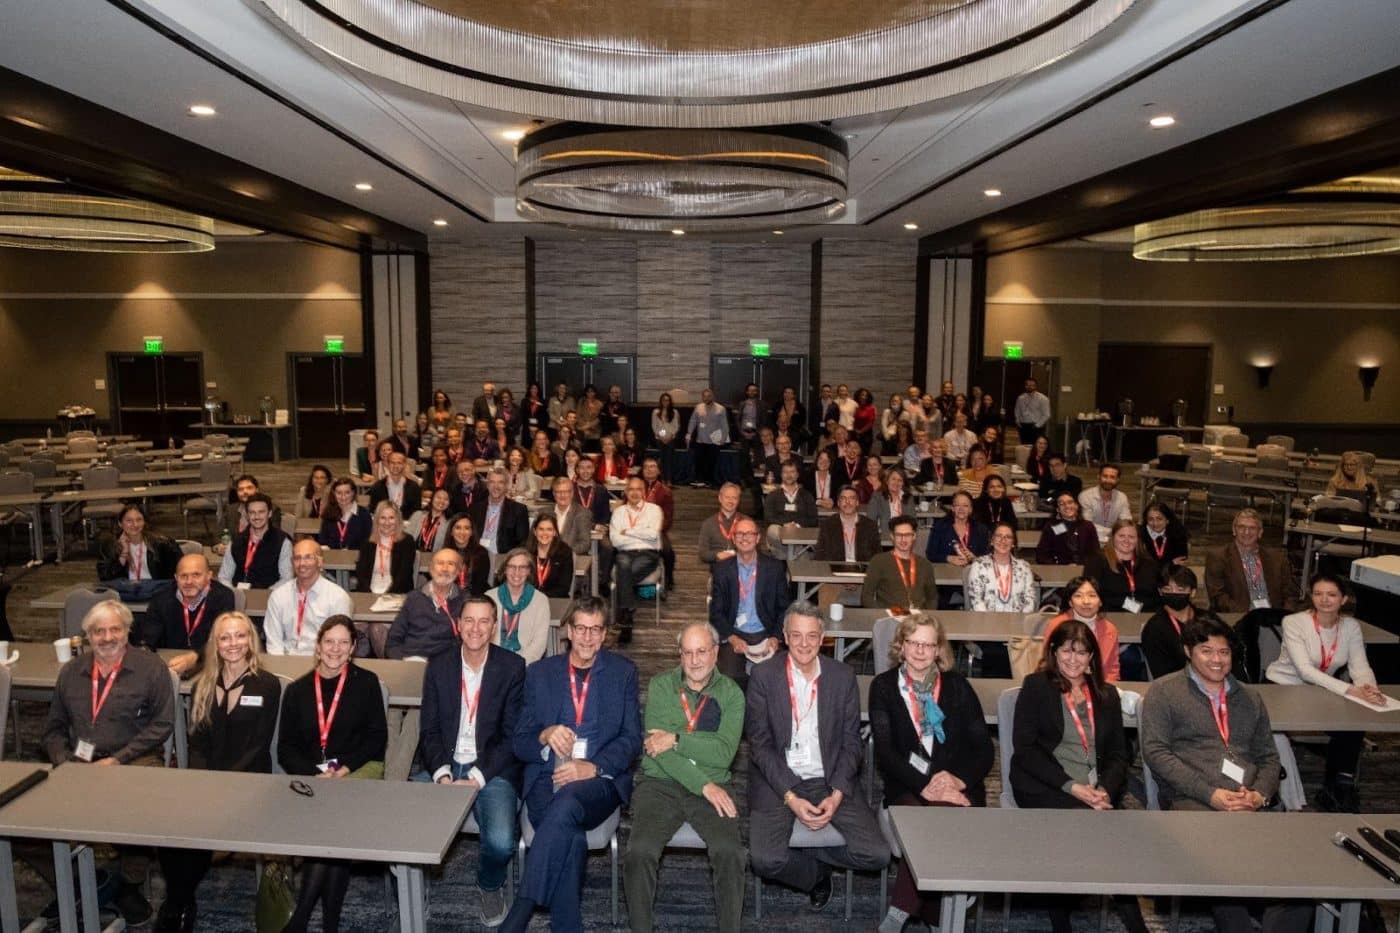 The 13th Annual California ALS Research Summit Supports Progress and